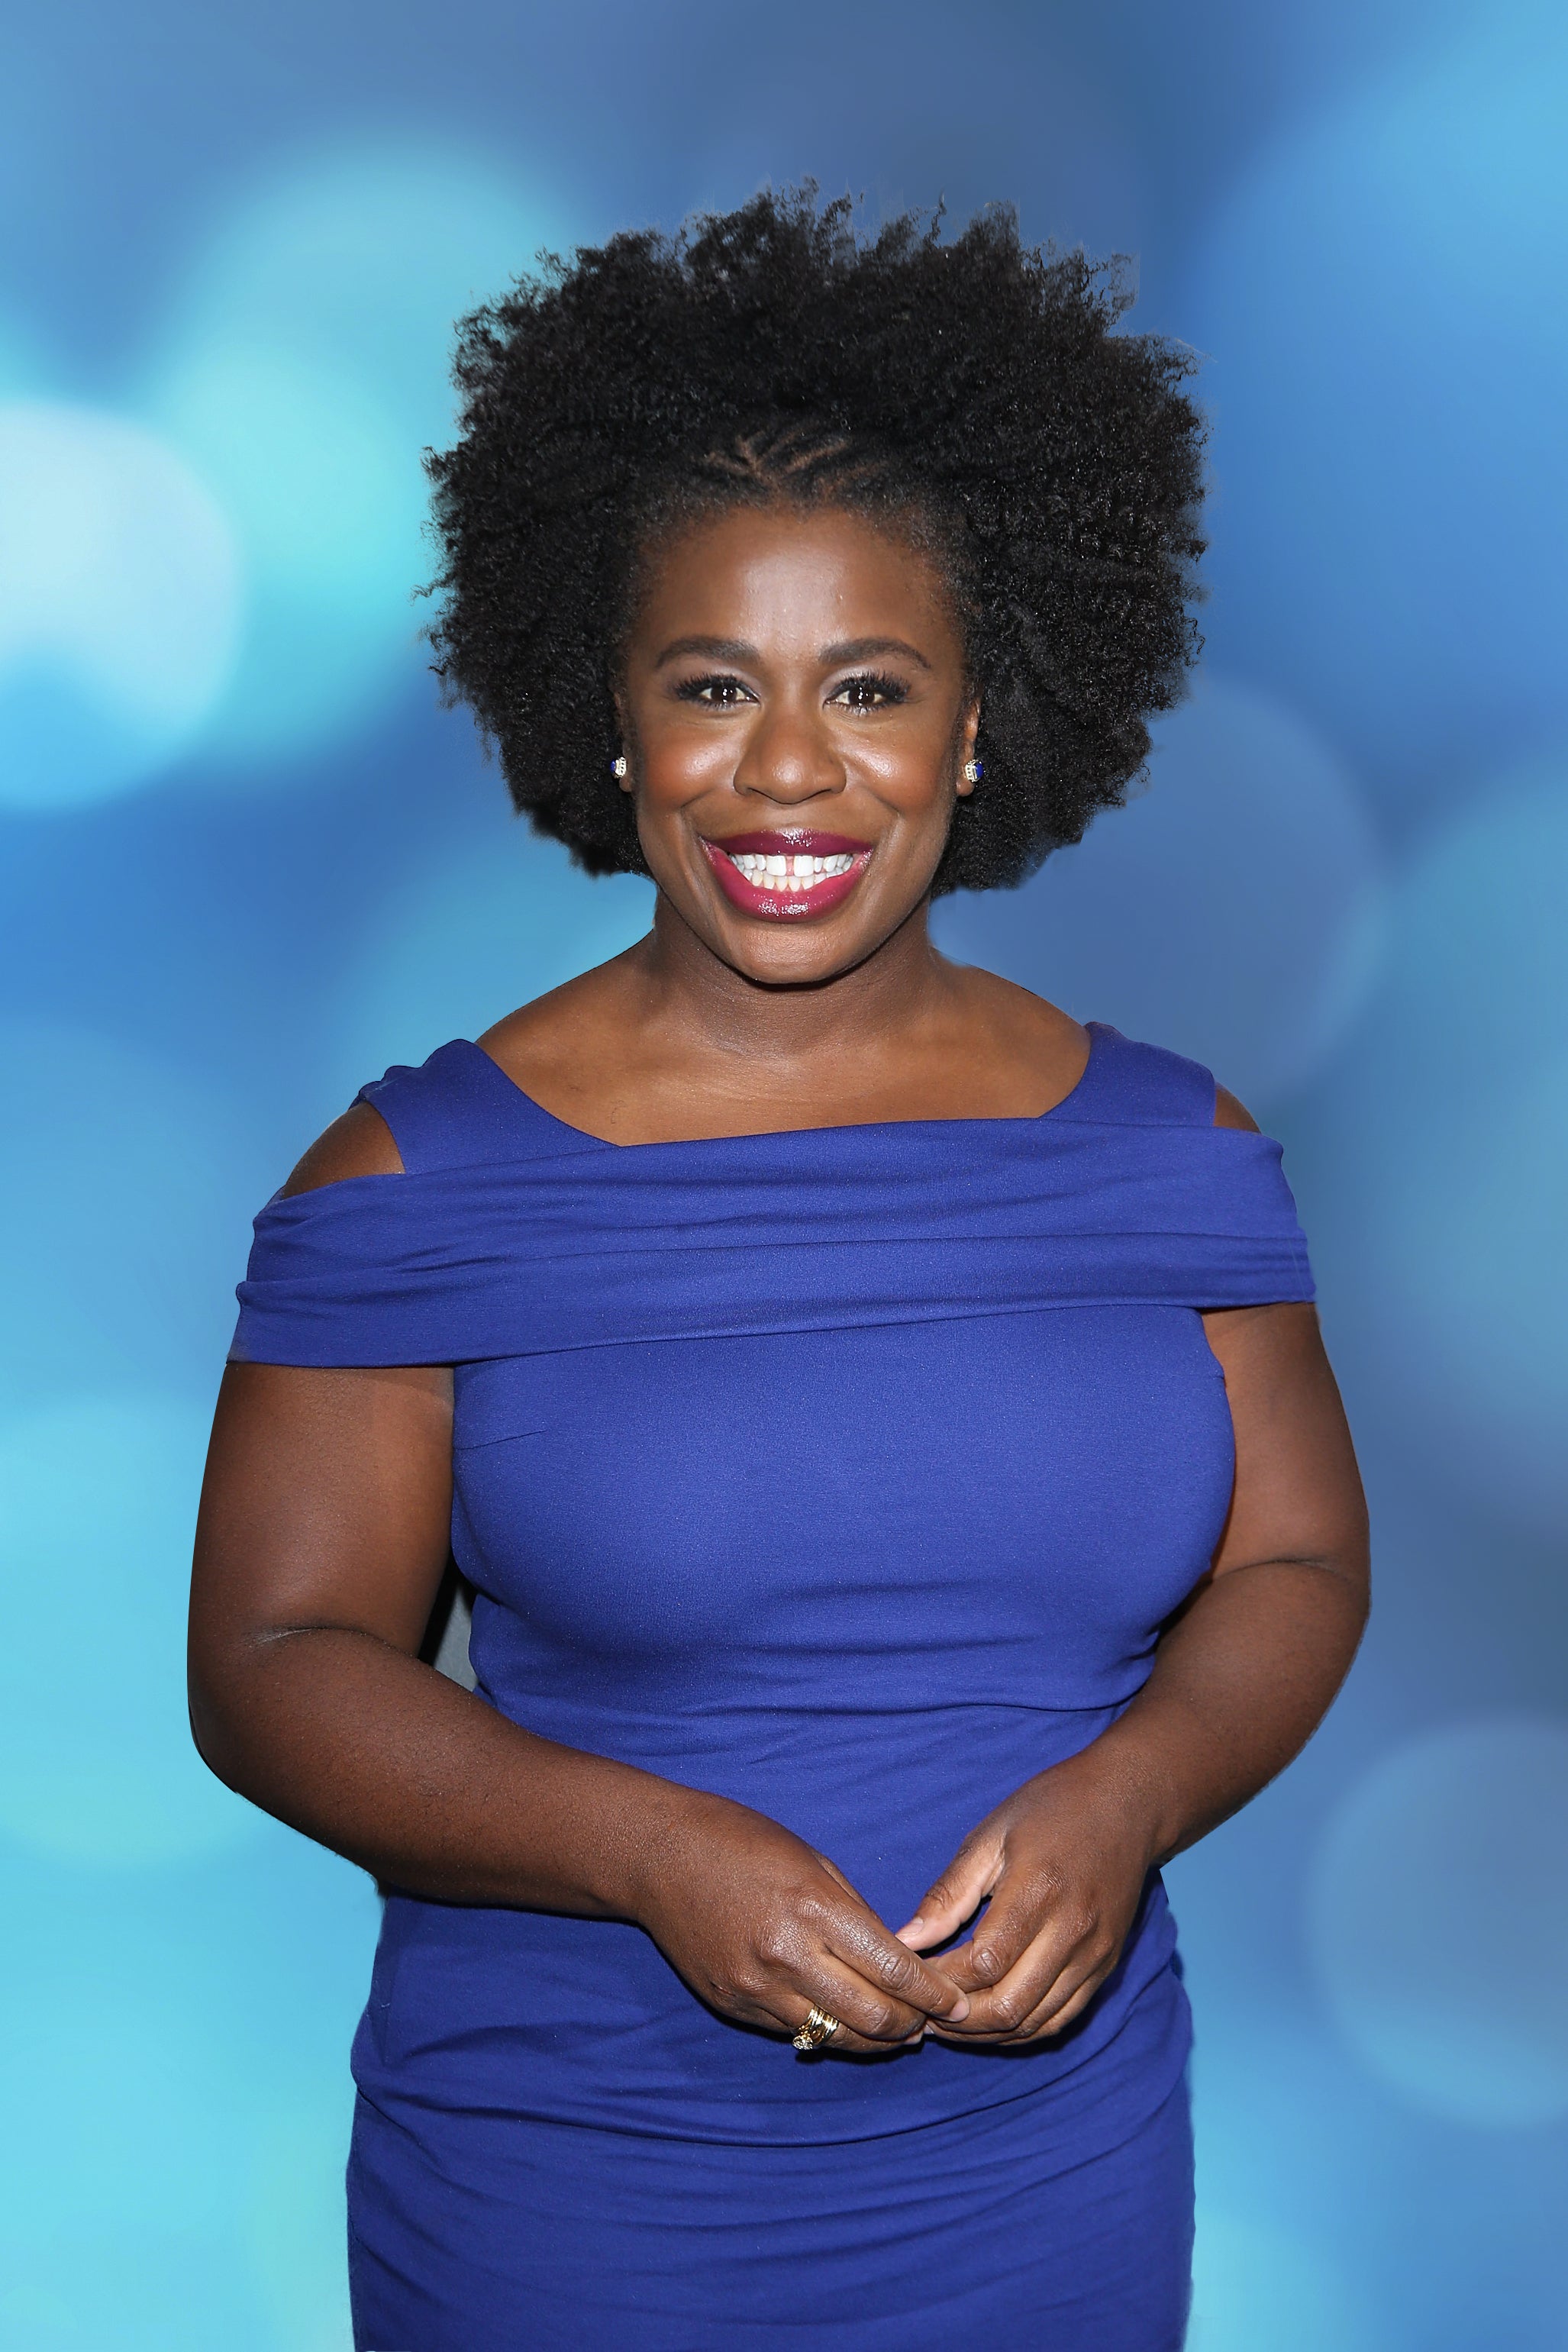 You Have To See Uzo Aduba's Glorious 'Team Blue' Afro
